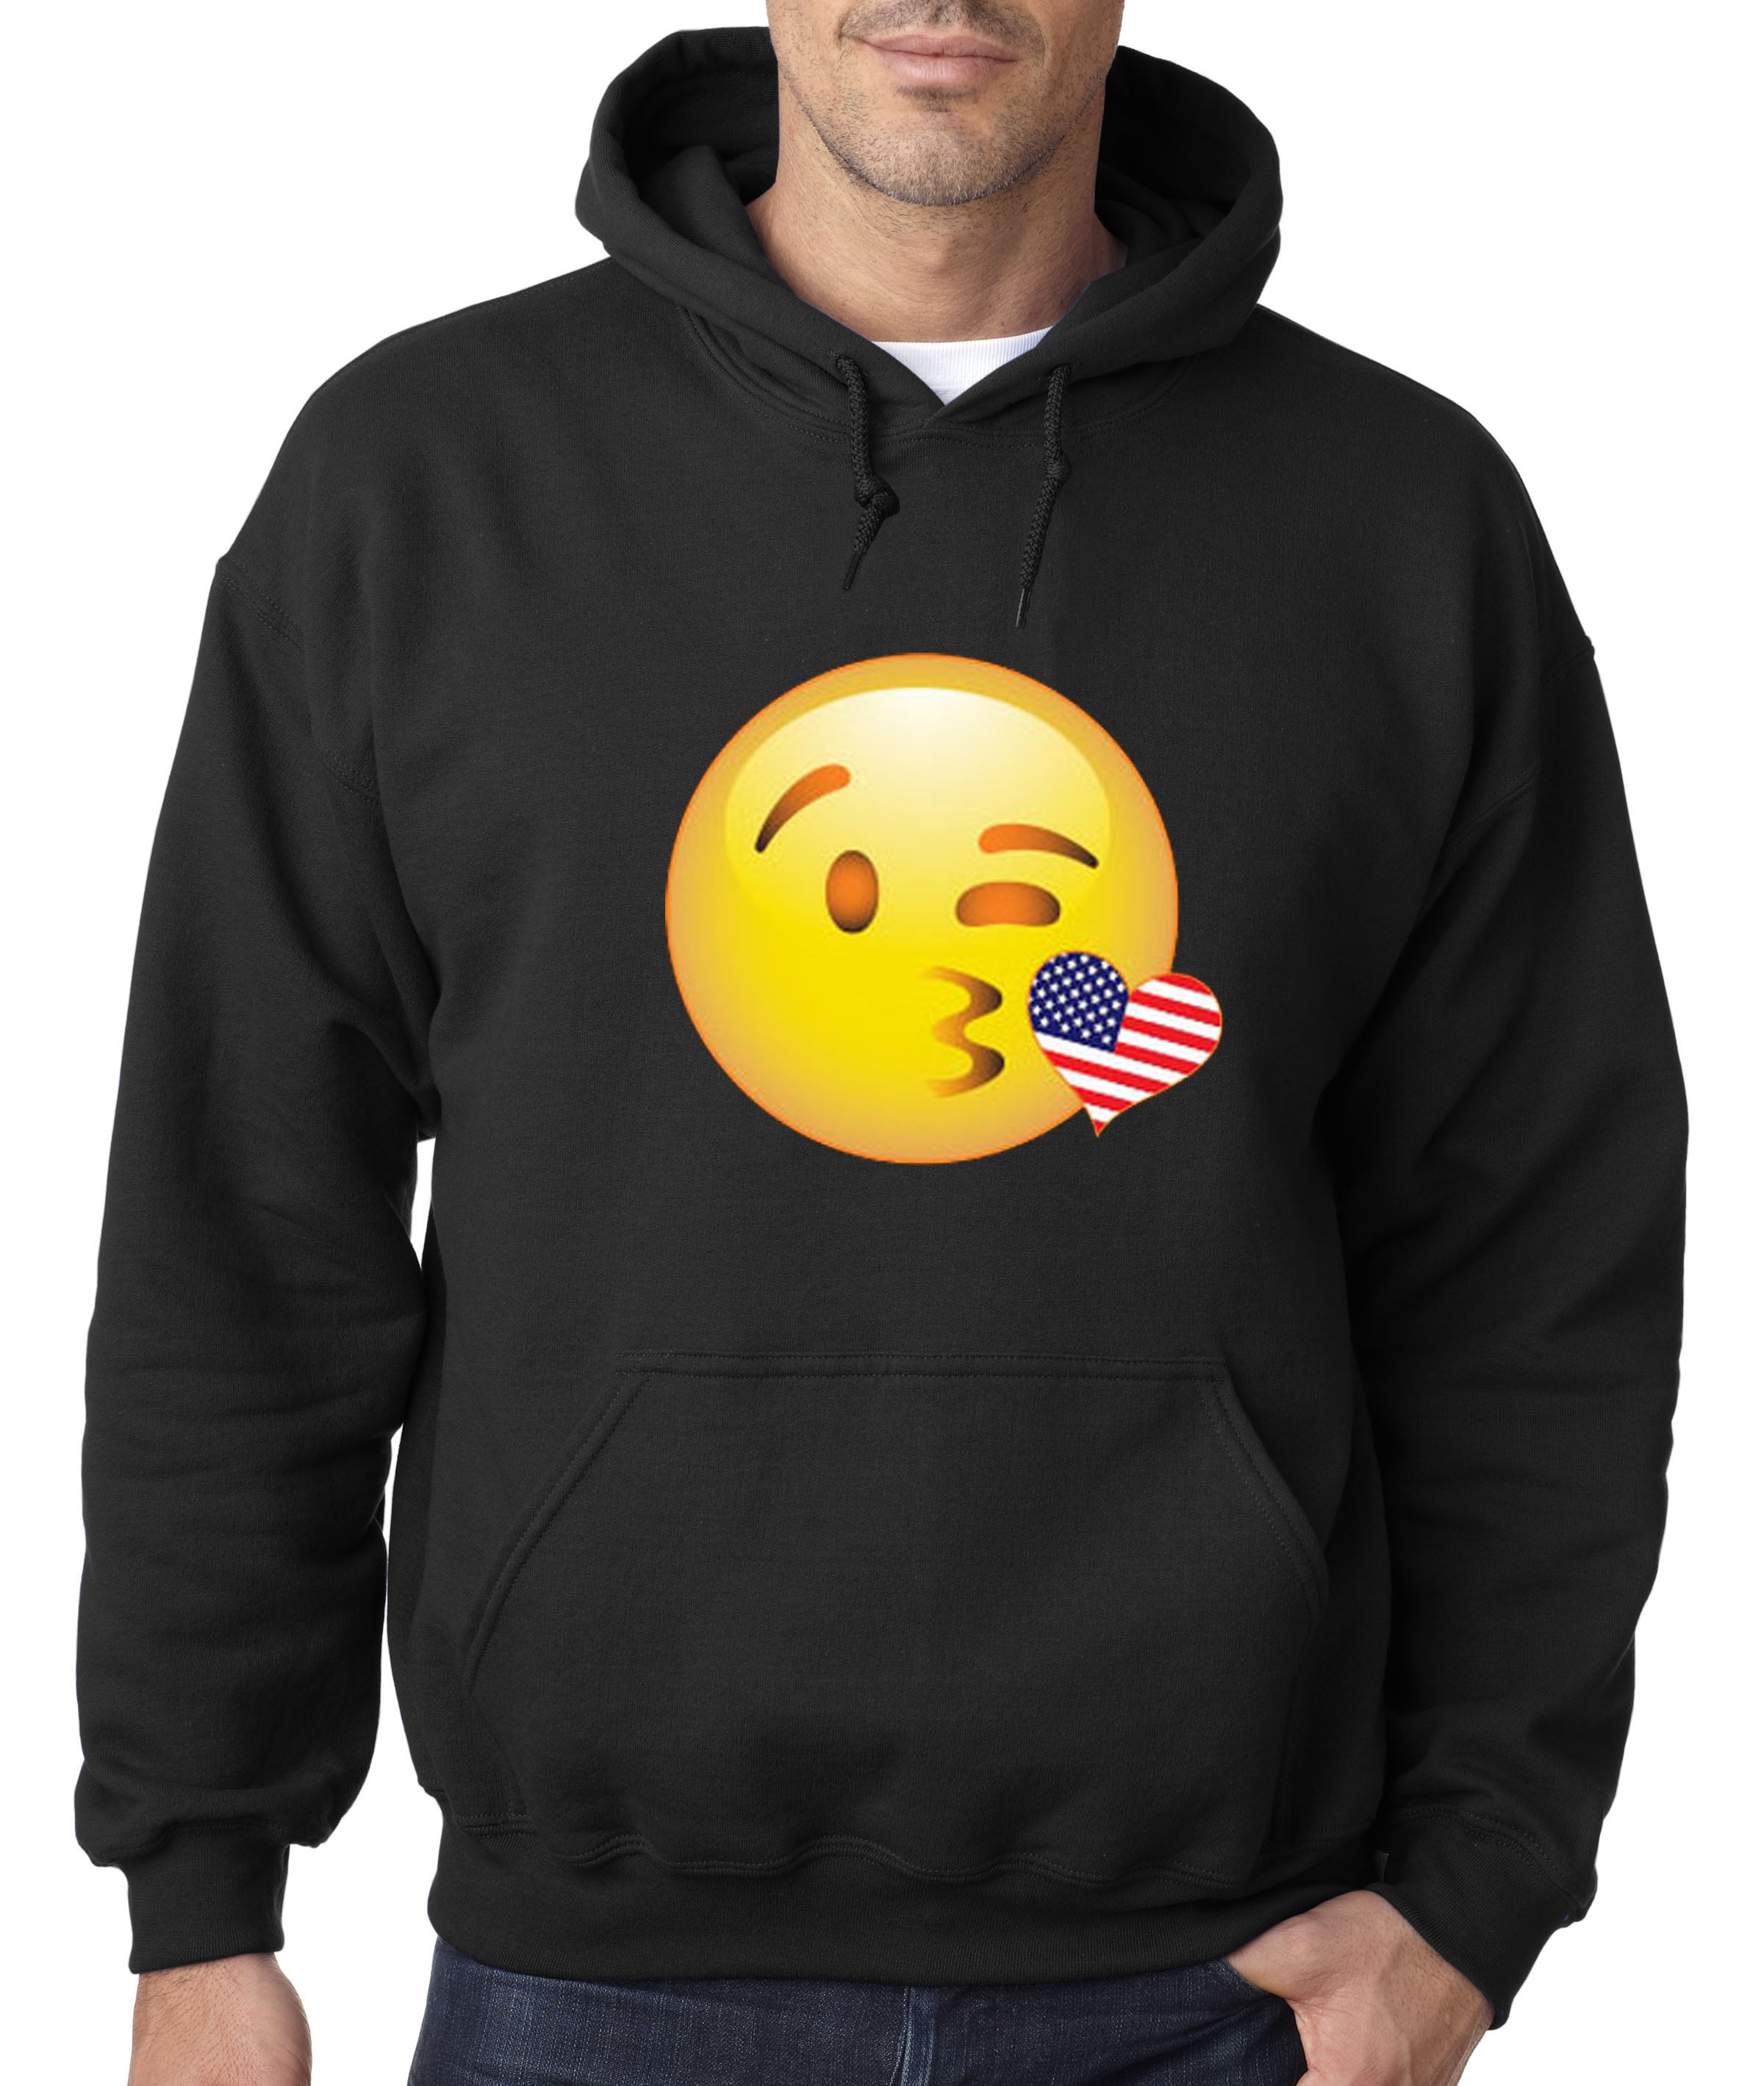 Details about   USA All Day Unisex White Hoodie Cute 4th Of July Design Hoodie